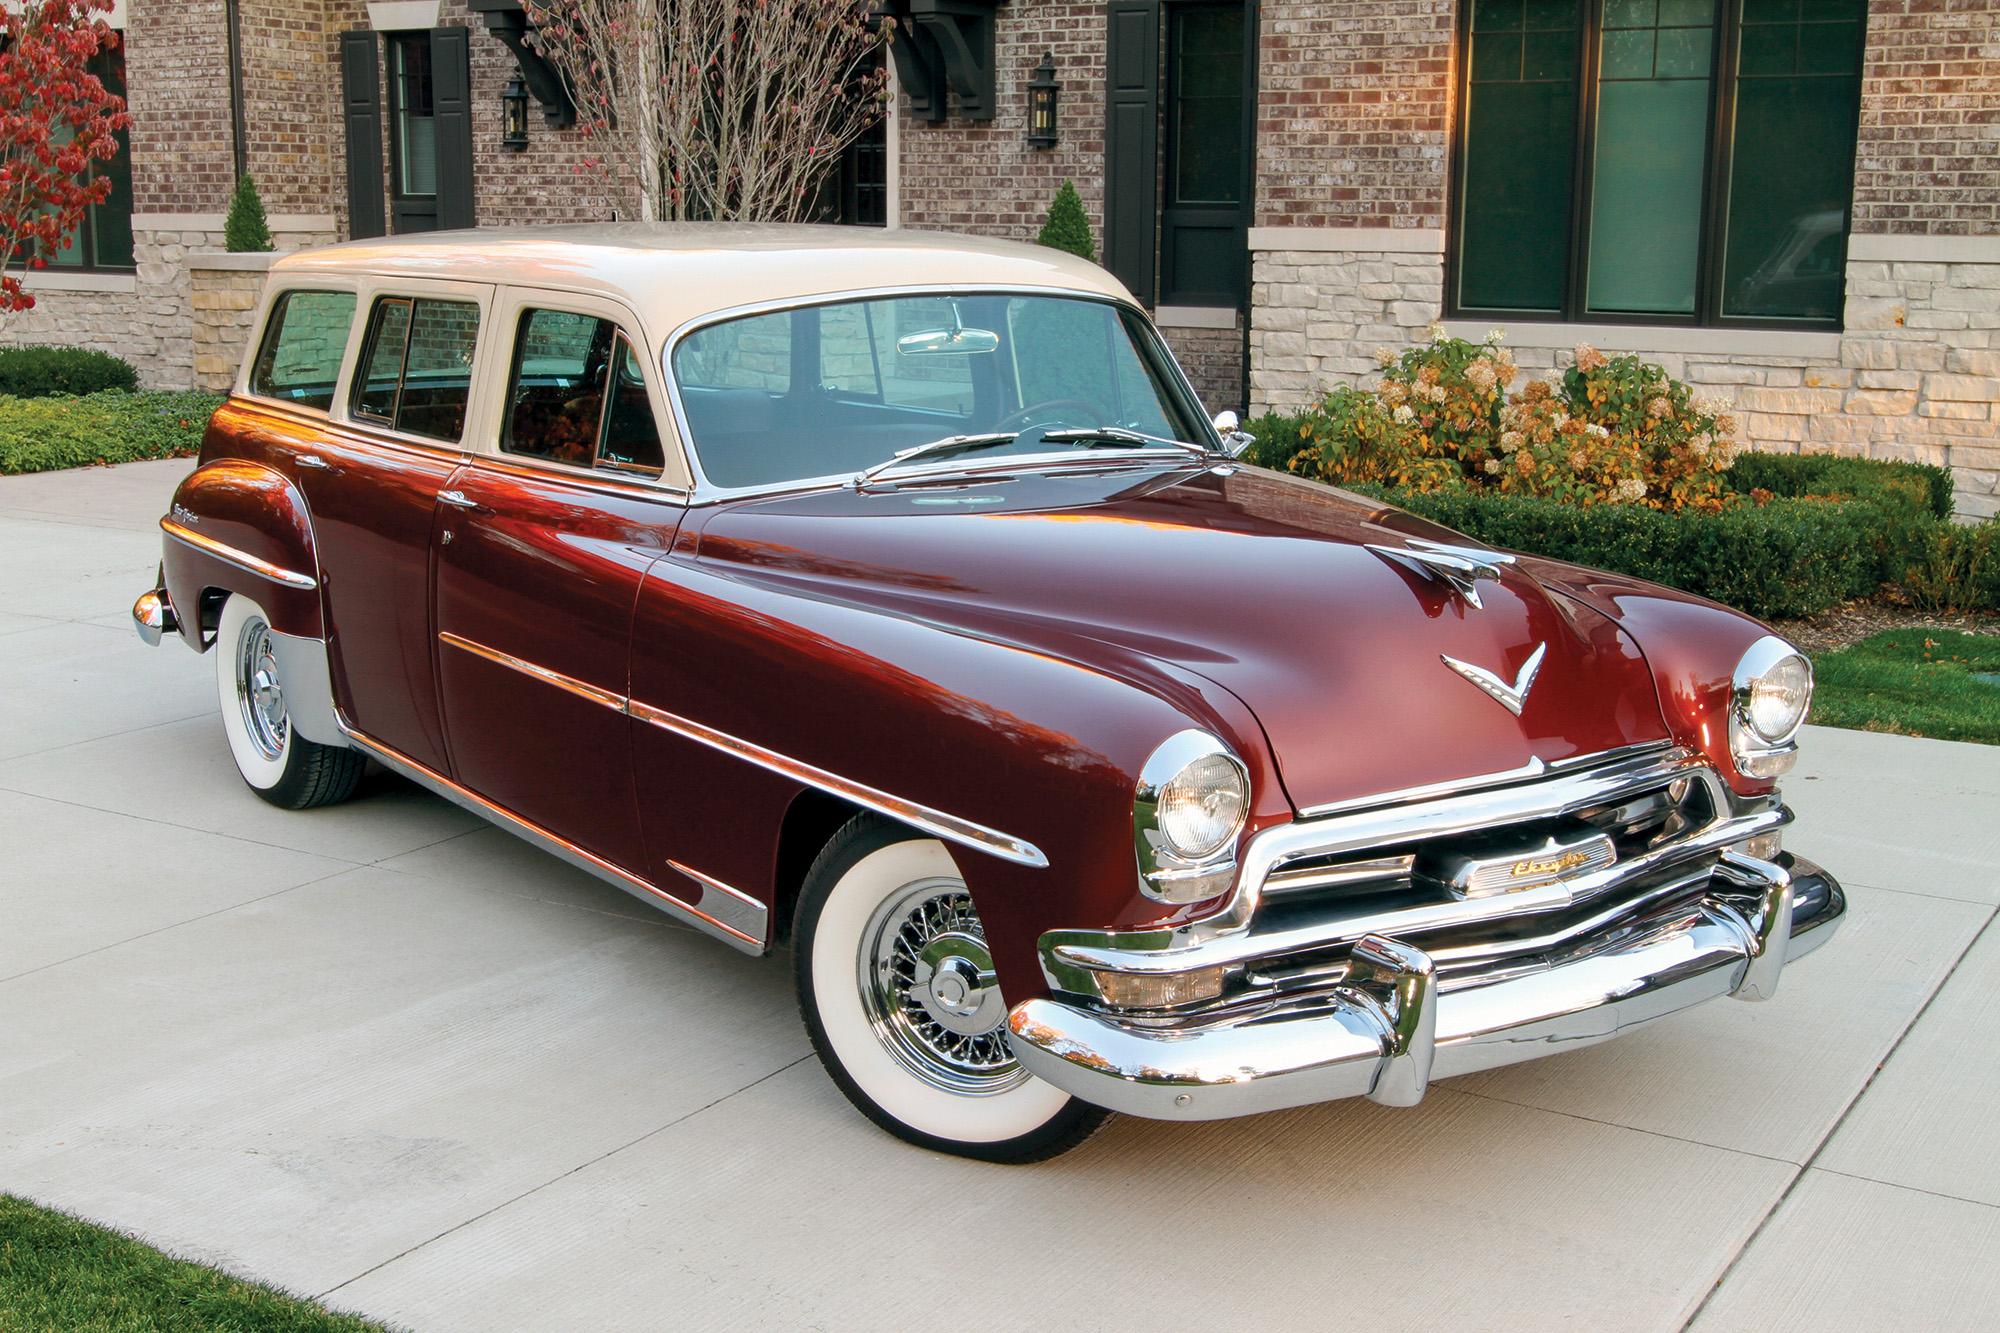 One and a half restorations later, 1954 Chrysler Town & Country showcases clever Chrysler engineering